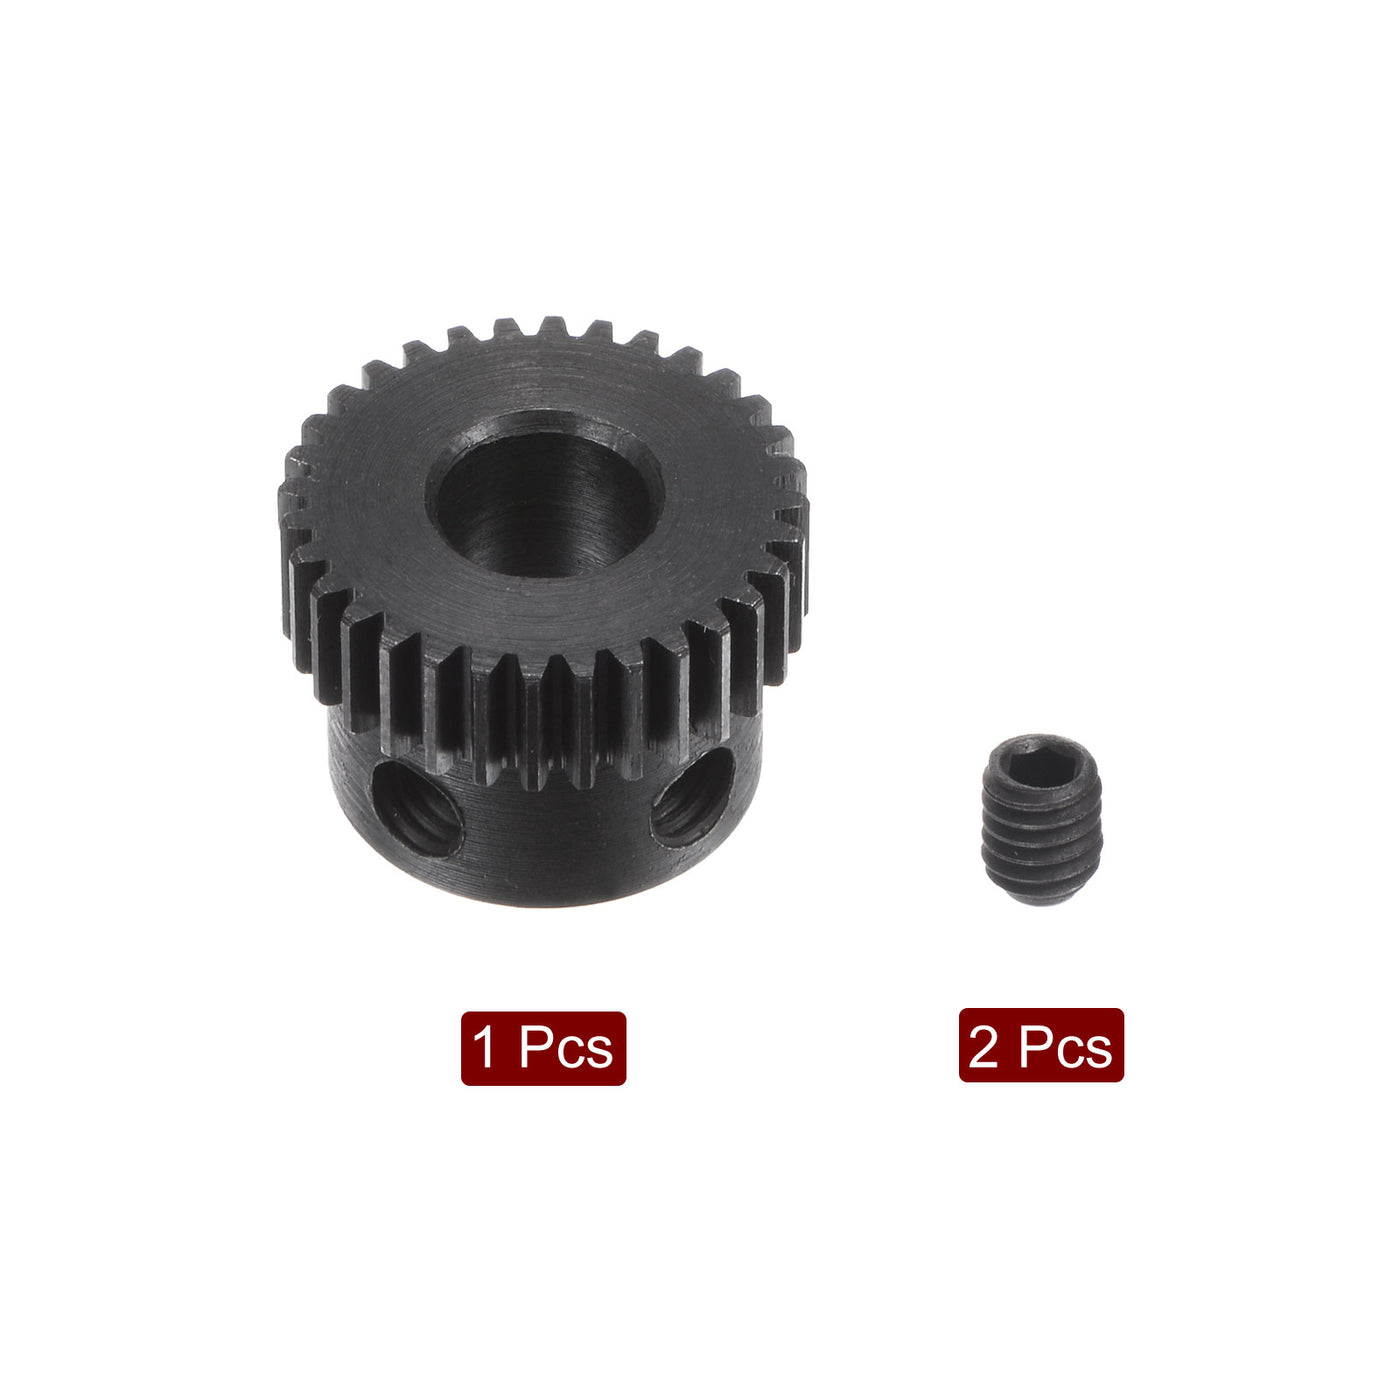 uxcell Uxcell 0.5 Mod 32T 6mm Bore 17mm Outer Dia 45# Carbon Steel Motor Pinion Gear Set